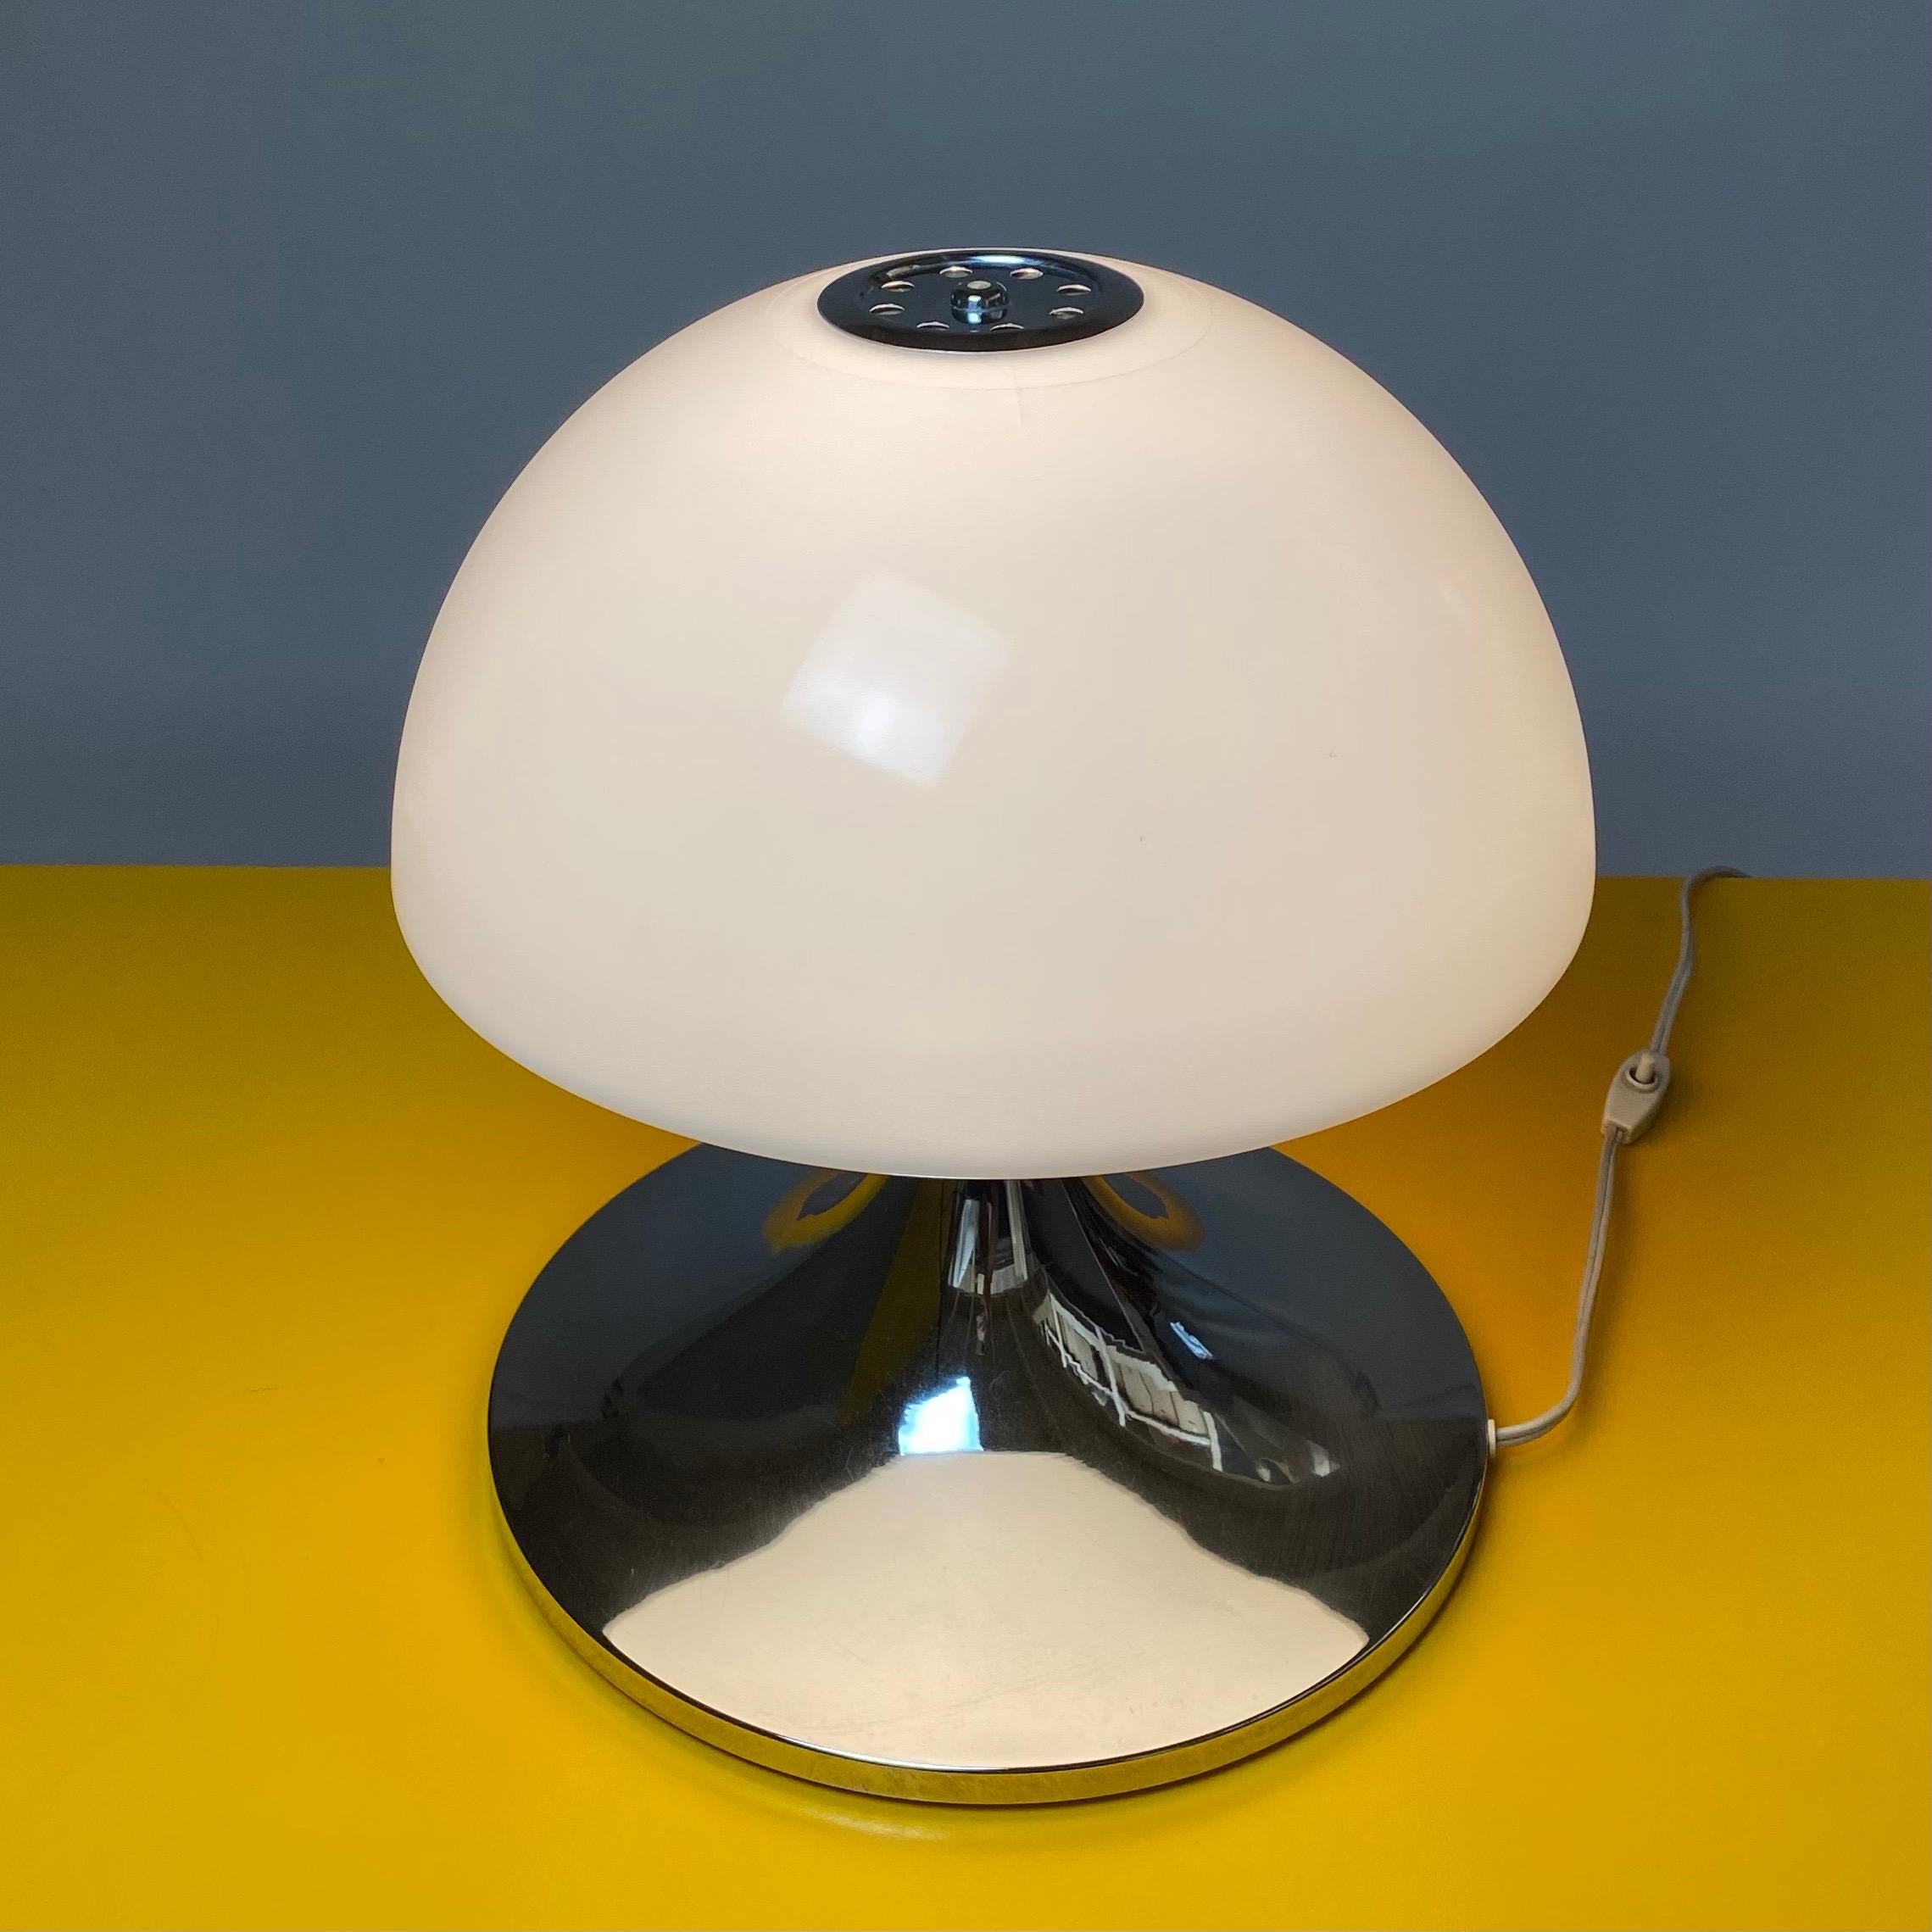 In style of Harvey Guzzini italian made large table lamp. 

Tulip shaped chrome base and milky white acrylic shade. 

All original and in excellent condition with few age related signs.

Light source: E27 / E26 edison screw fitting max 60W.